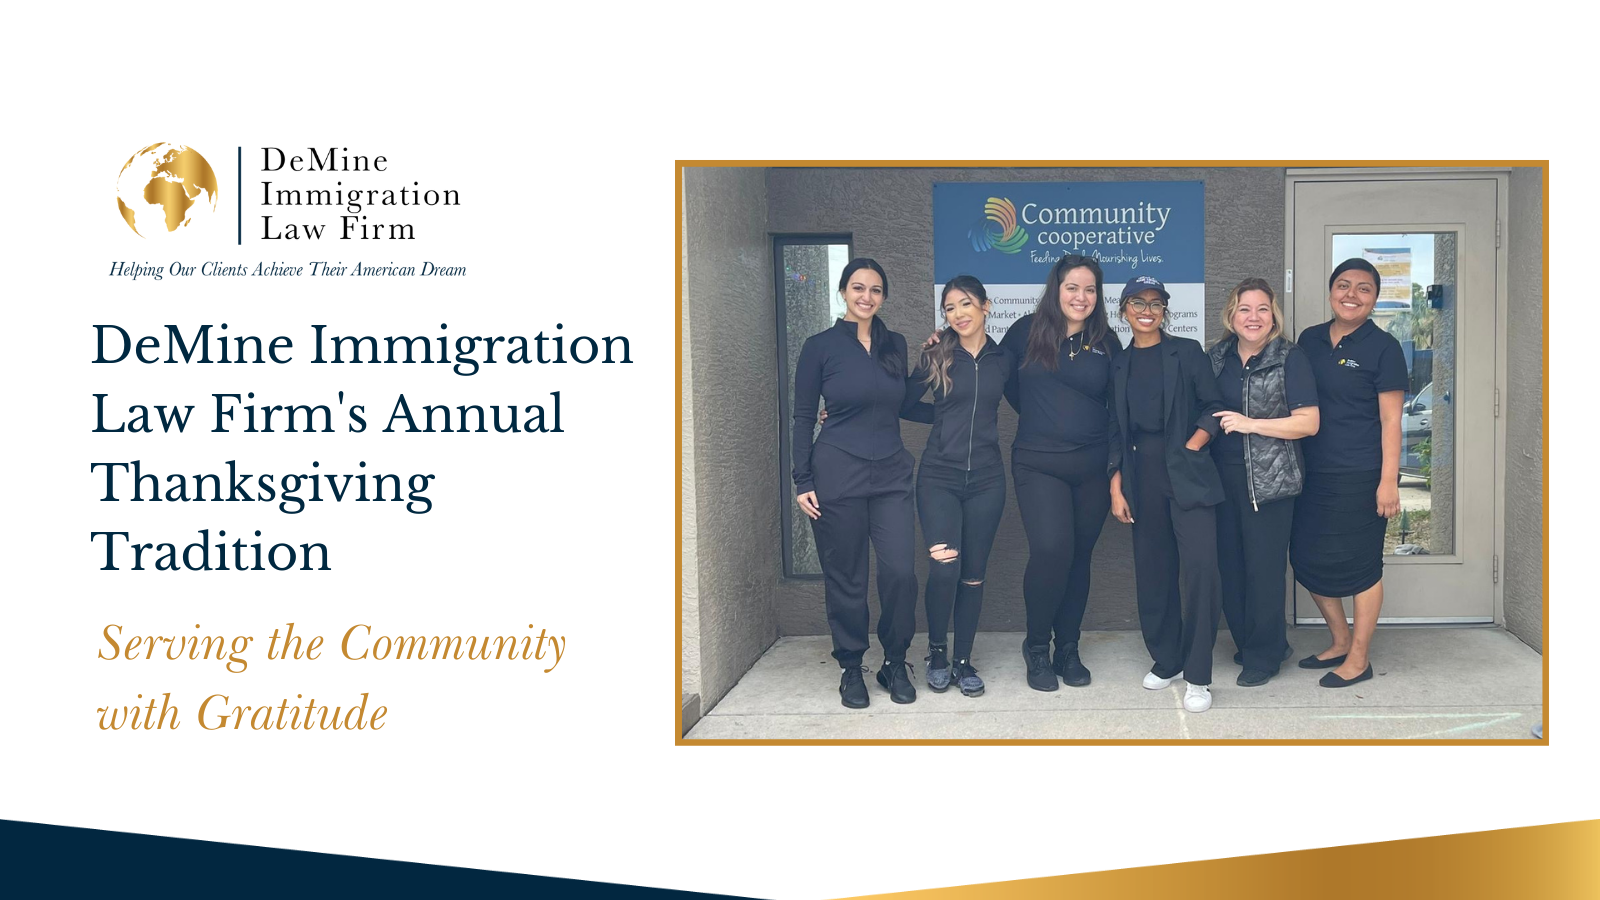 DeMine Immigration Law Firm's Annual Thanksgiving Tradition: Serving the Community with Gratitude